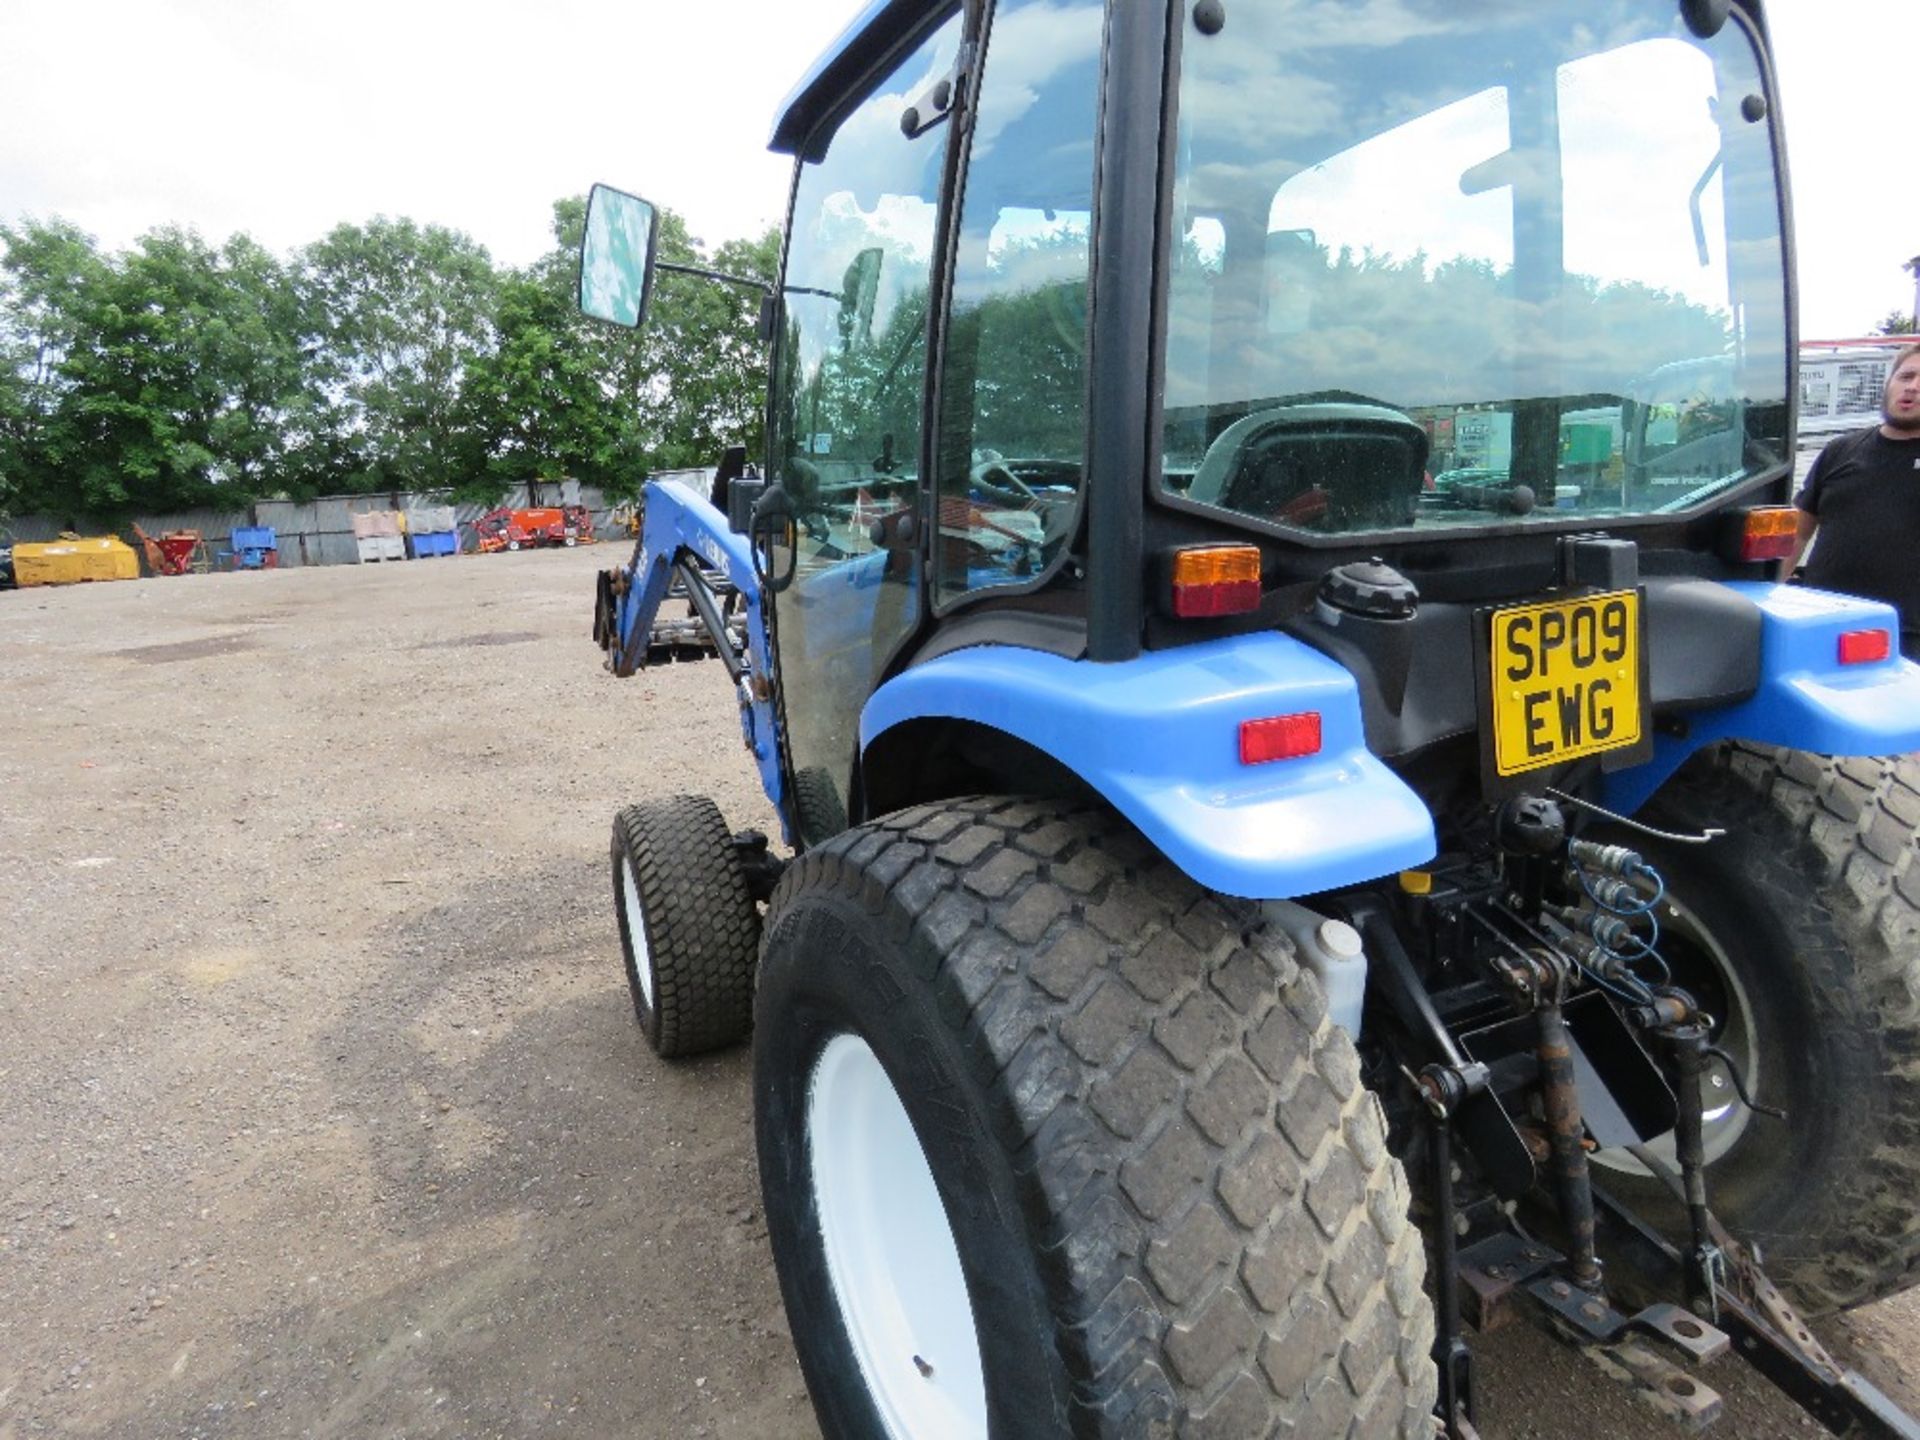 NEW HOLLAND TC45A 4WD COMPACT TRACTOR WITH LEWIS 3520 FRONT LOADER AND PALLET FORKS. REG:SP09 EWG ( - Image 5 of 13